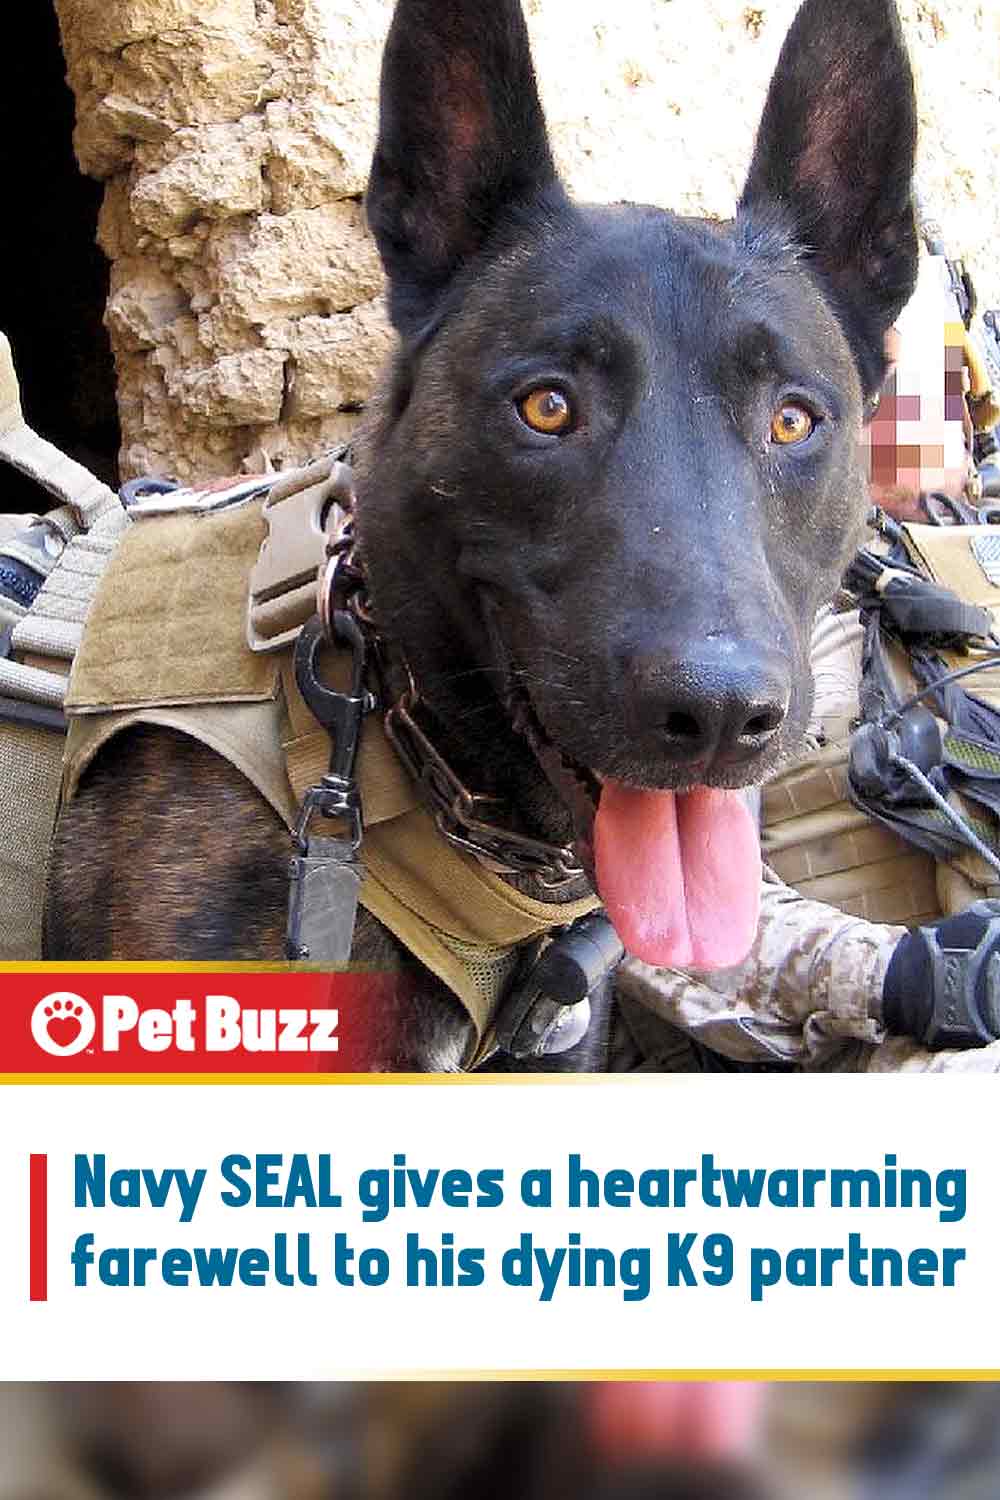 Navy SEAL gives a heartwarming farewell to his dying K9 partner